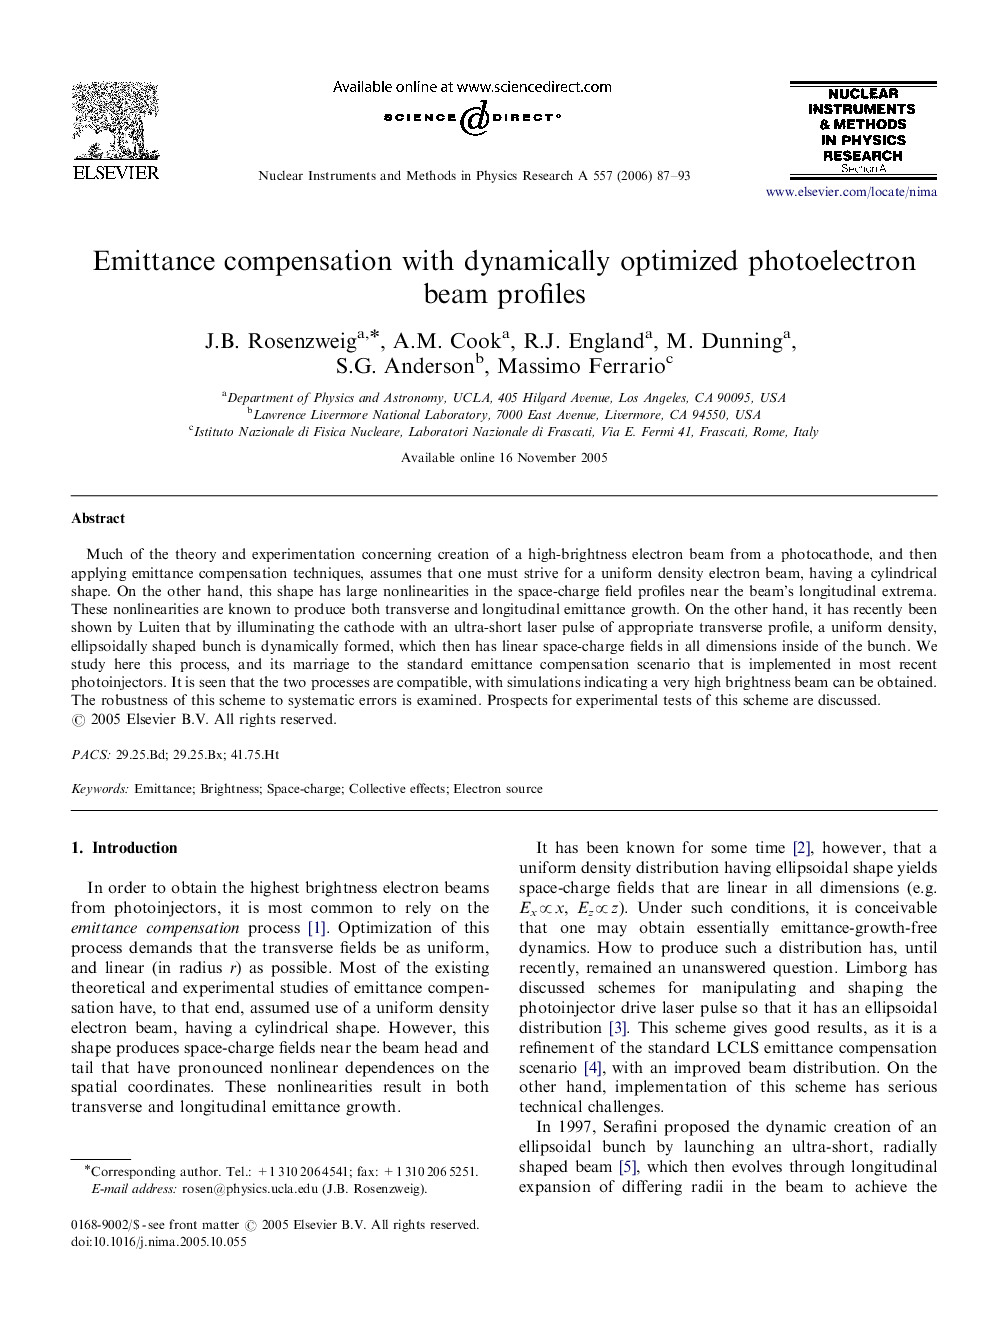 Emittance compensation with dynamically optimized photoelectron beam profiles